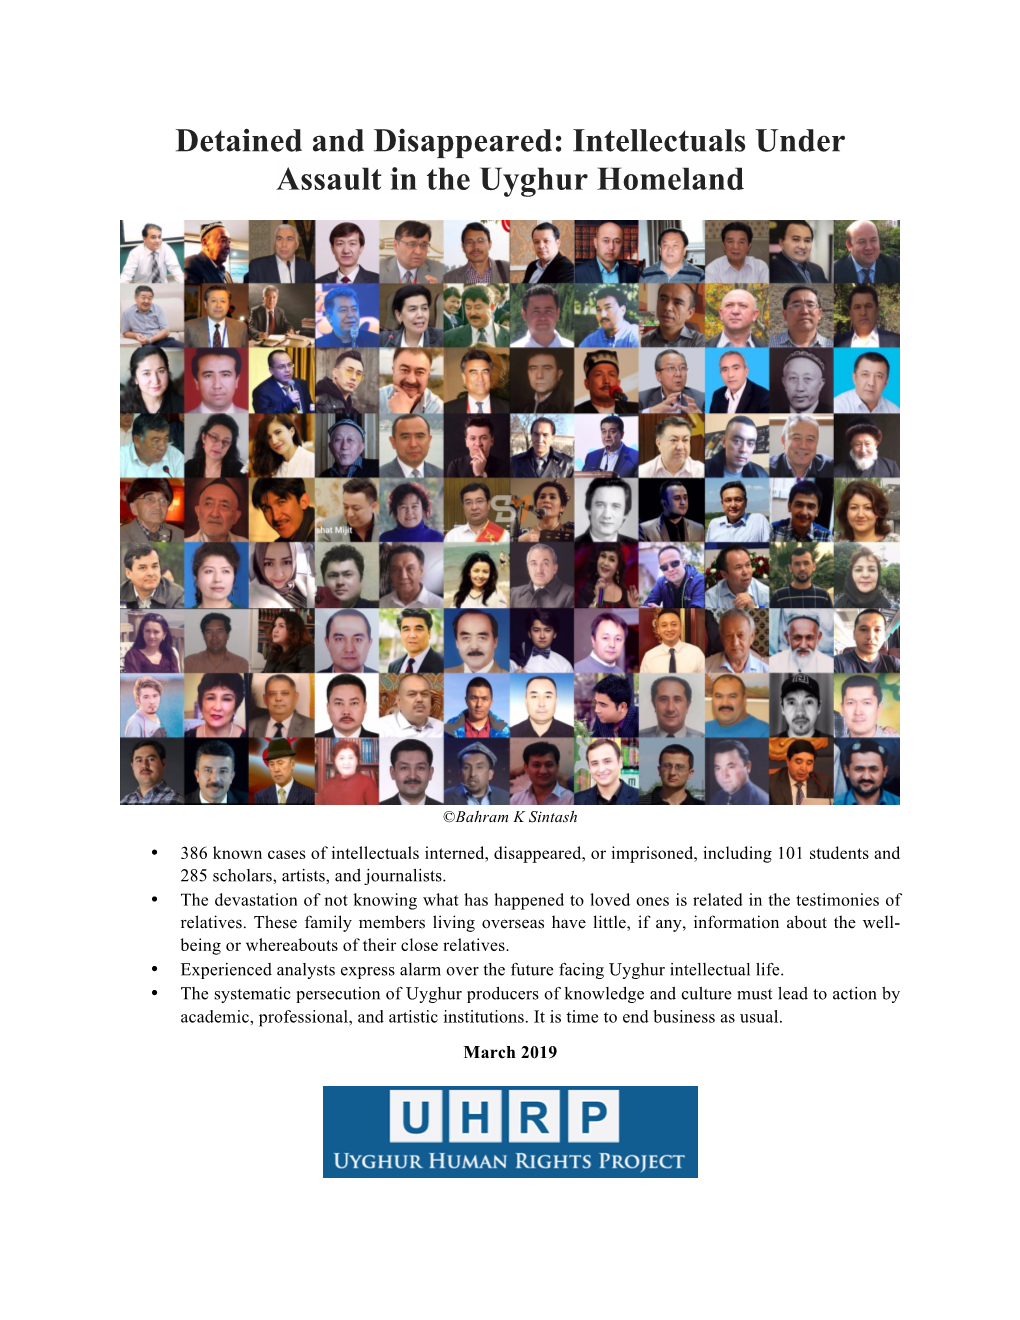 Detained and Disappeared: Intellectuals Under Assault in the Uyghur Homeland